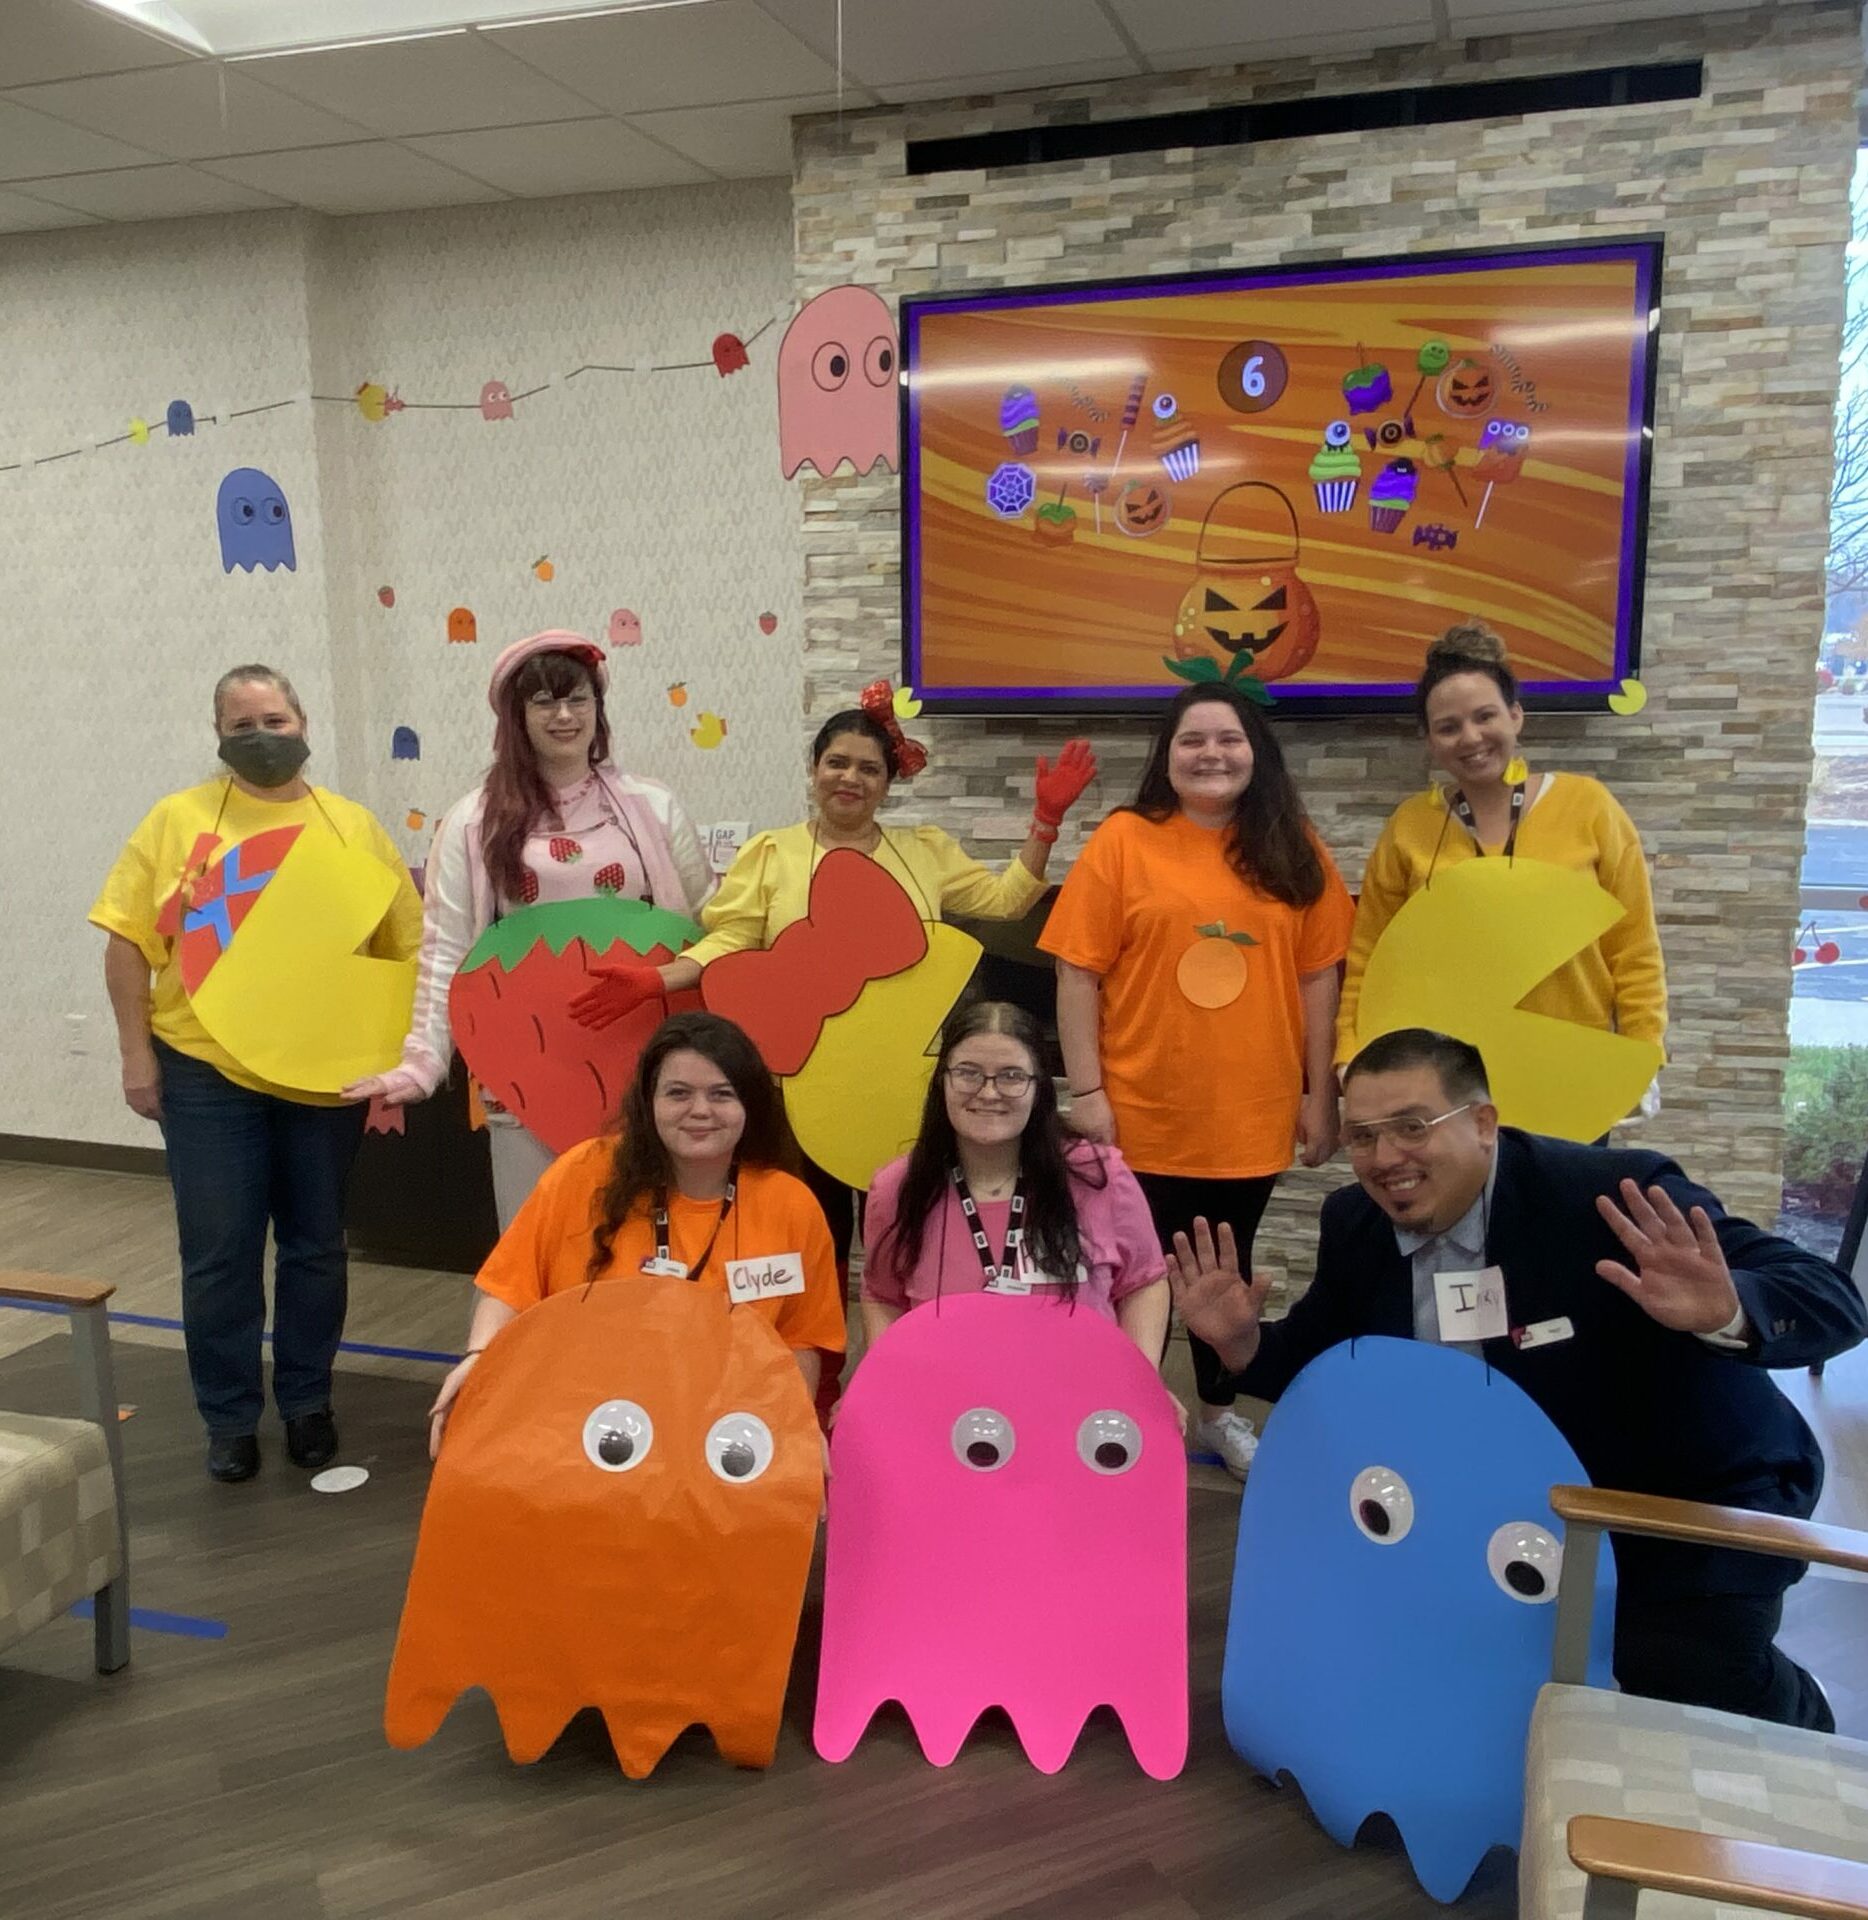 Staff dressed as Pac-Man characters